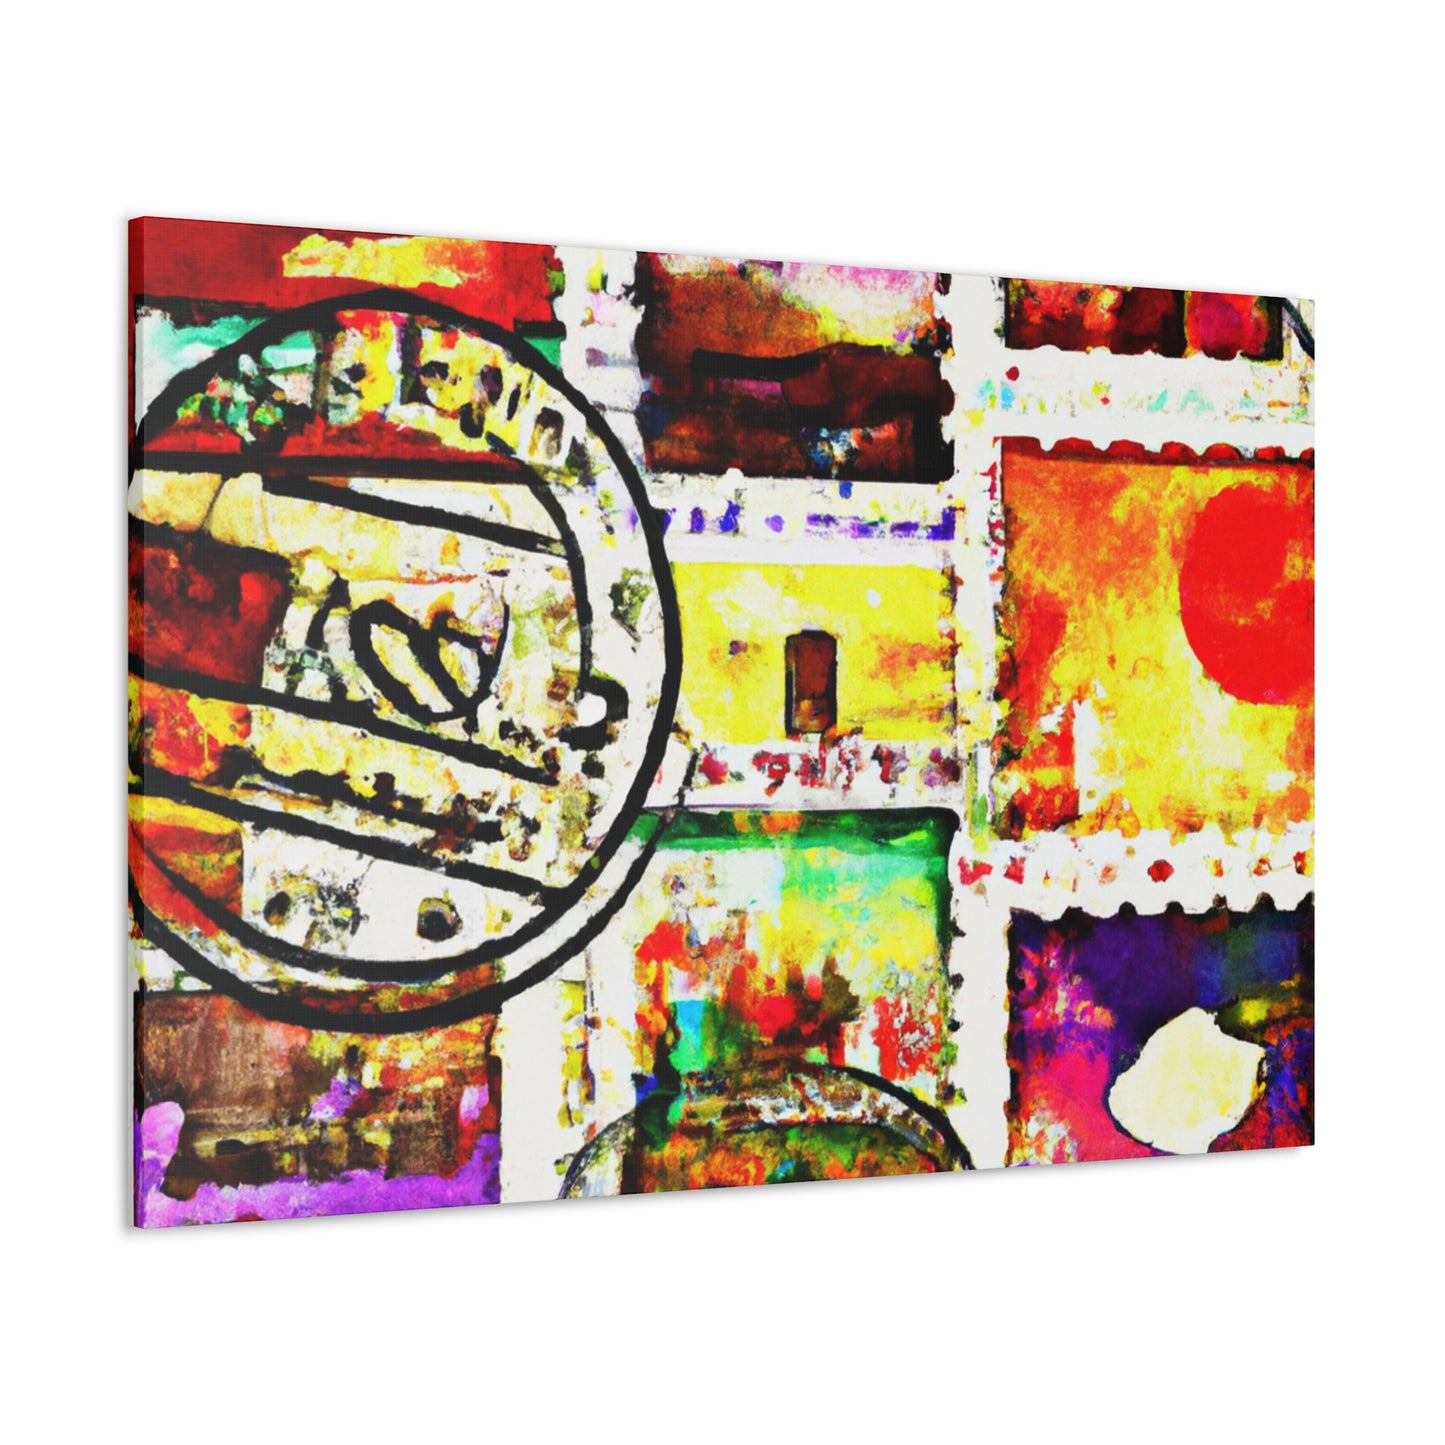 Timeless Treasures: Global Philatelic Stamps. - Postage Stamp Collector Canvas Wall Art